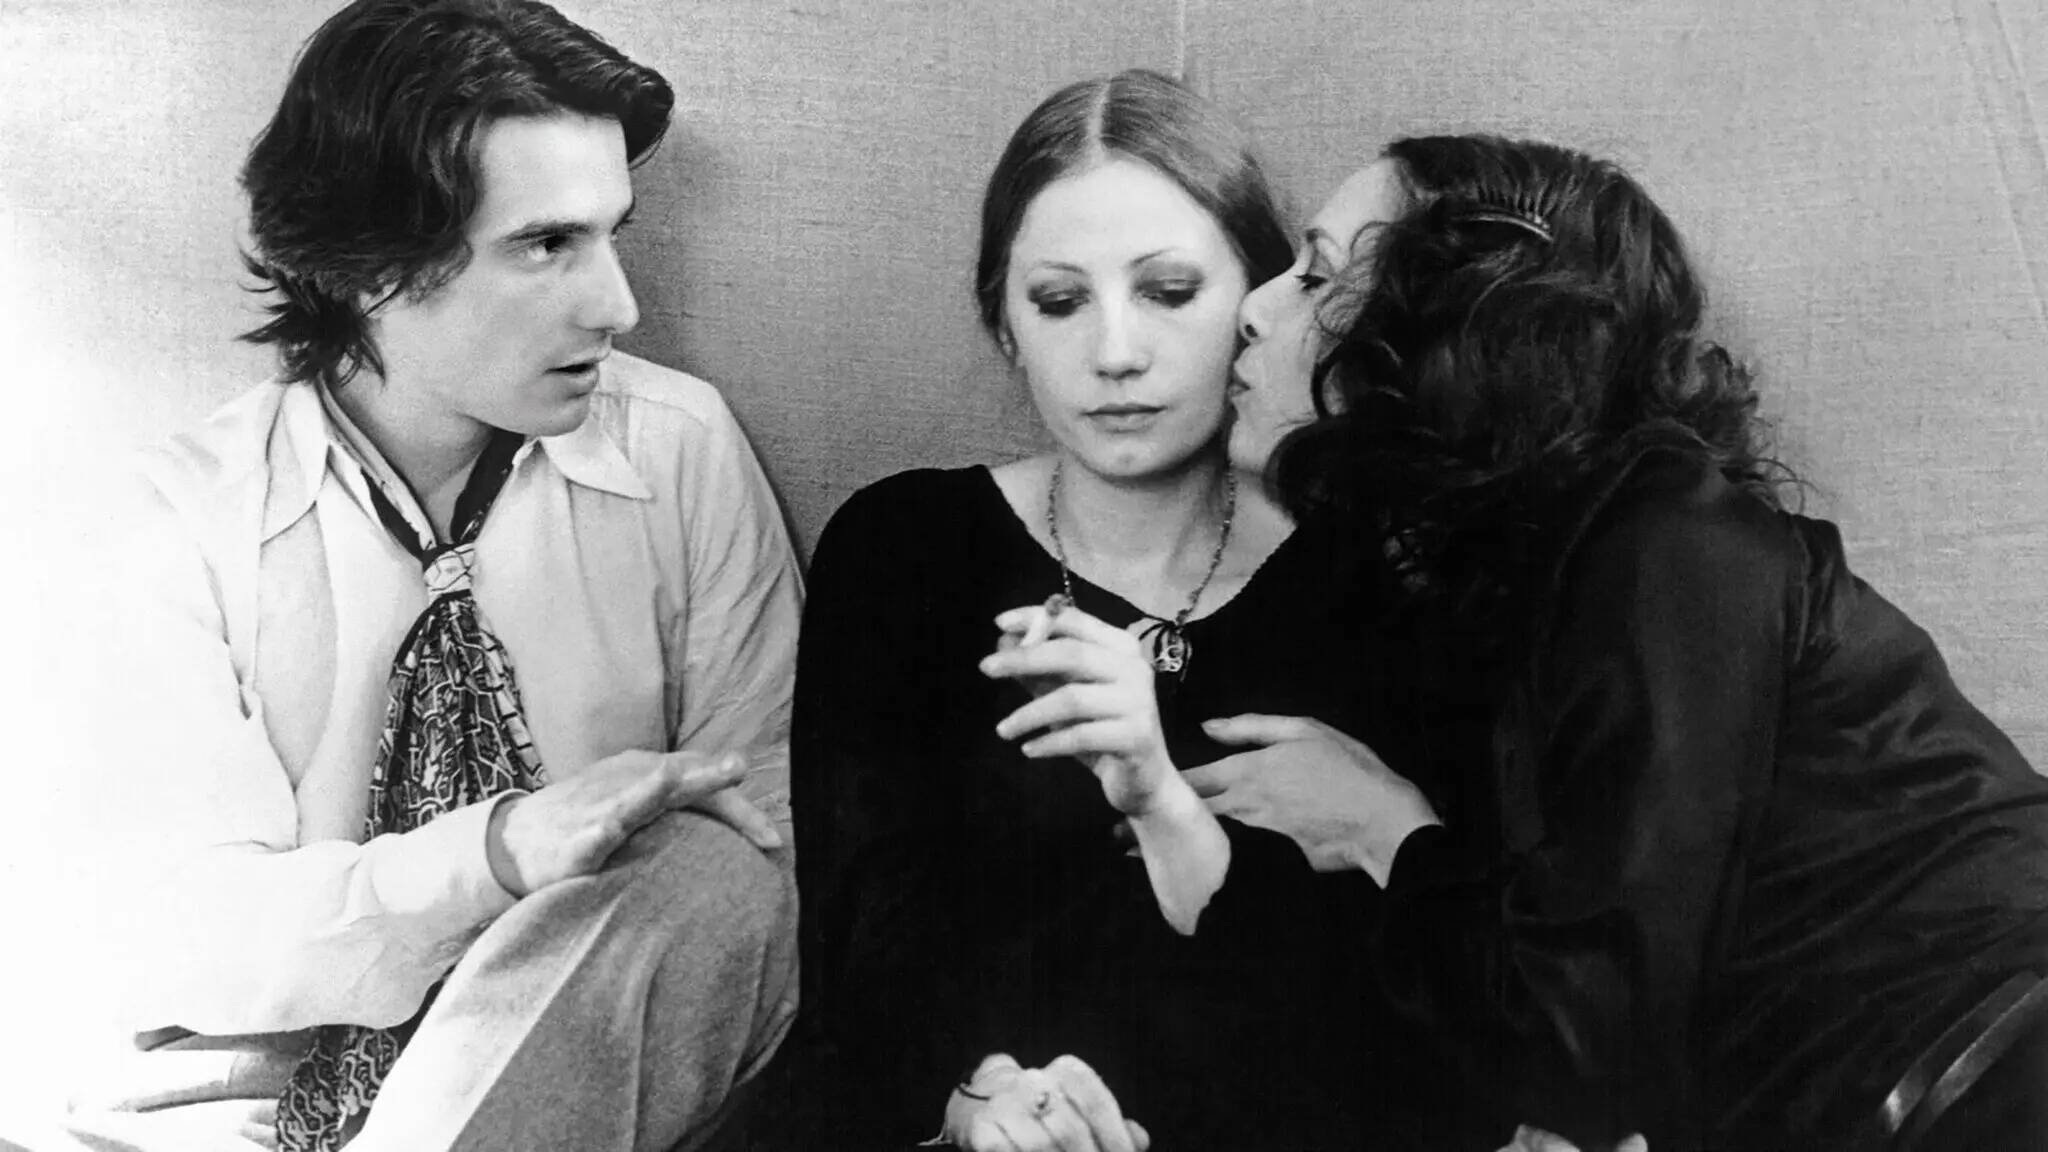 Jean-Pierre Léaud, Bernadette Lafont and Françoise Lebrun in &quot;The Mother and the Whore.&quot; (Courtesy FLC Press)